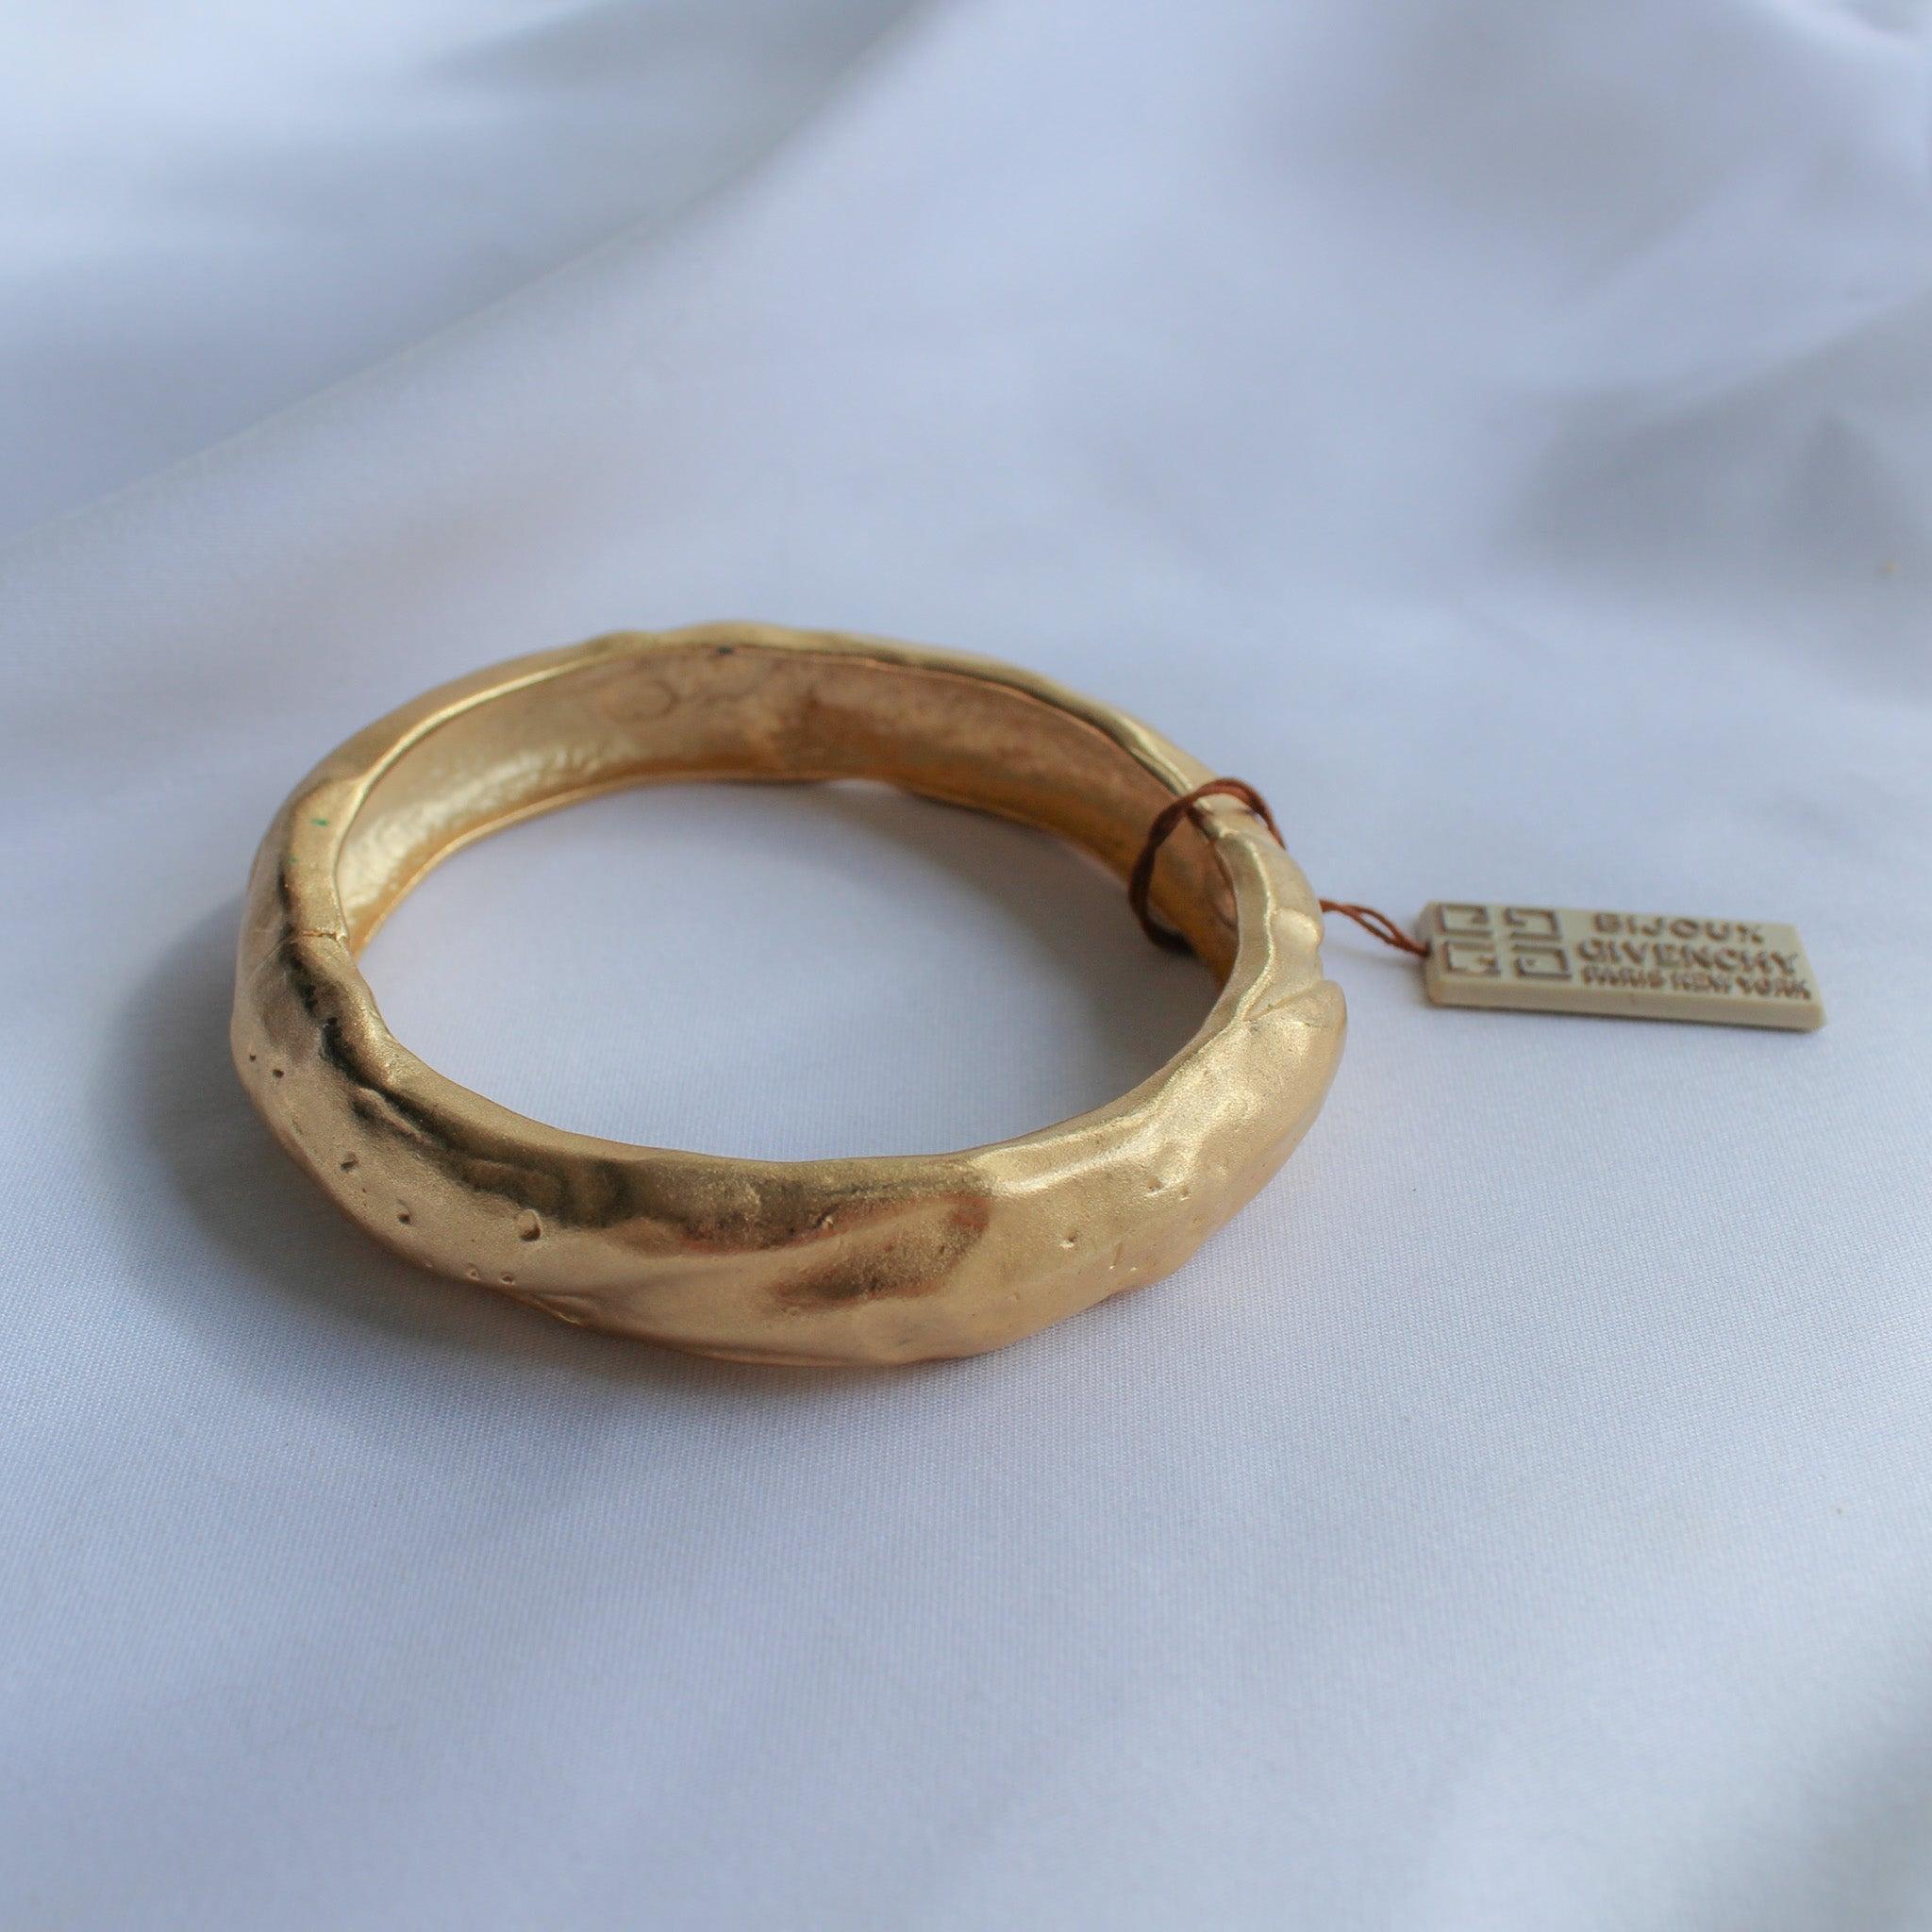 Vintage 1980s Givenchy Bracelet

Introducing a true vintage gem - an 80s gold plated textured bangle from Givenchy, unworn and in mint condition with its original tag. This stunning piece is a timeless classic, crafted with an intricately textured